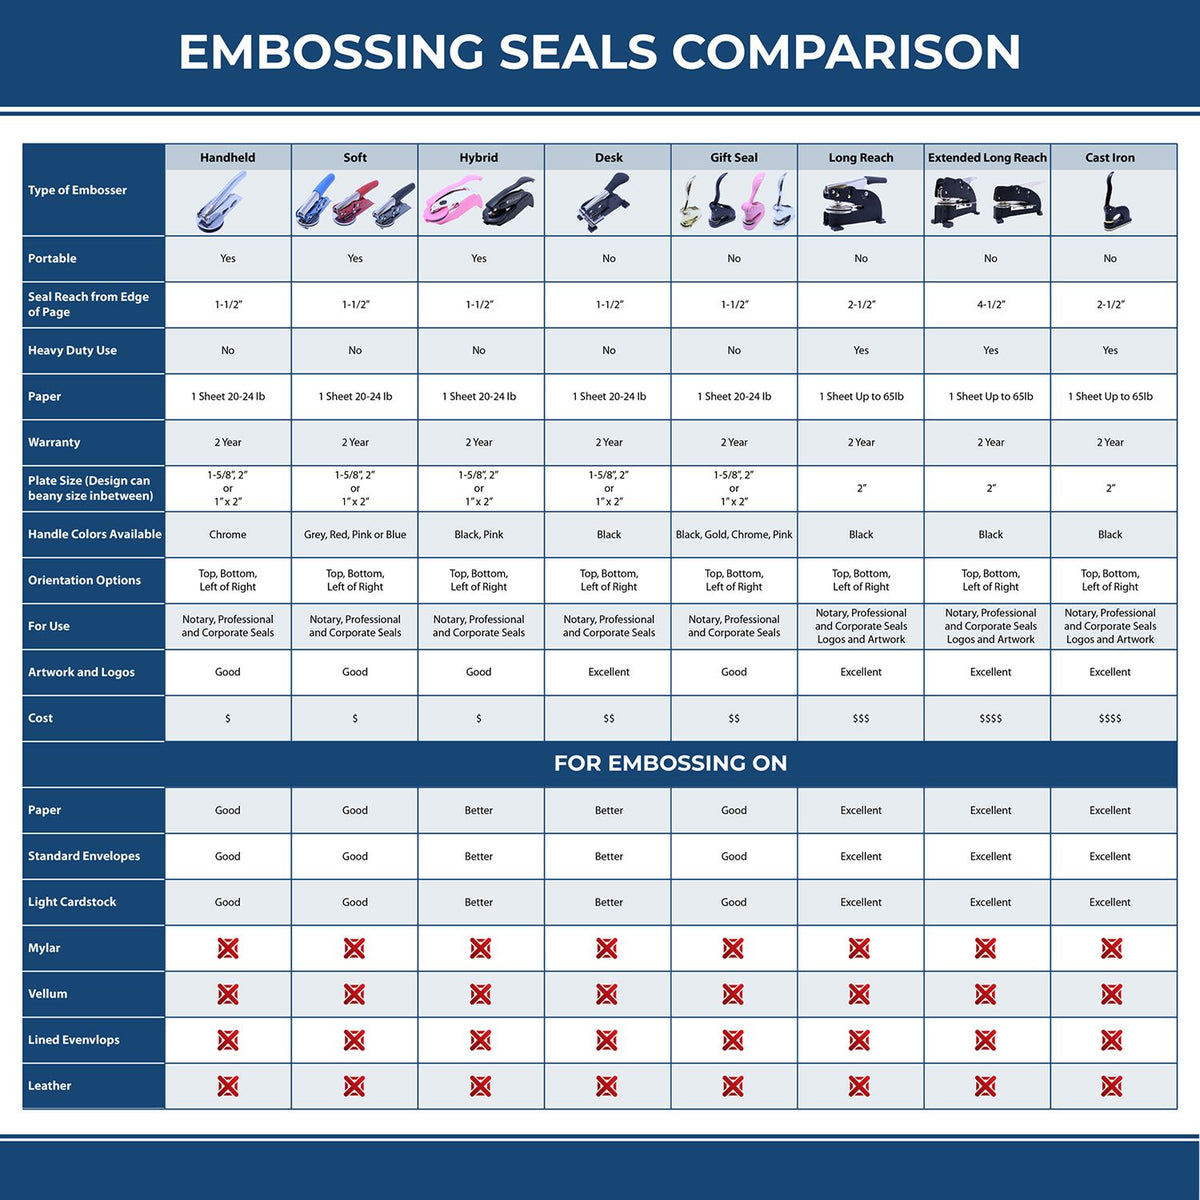 A comparison chart for the different types of mount models available for the State of Florida Soft Land Surveyor Embossing Seal.